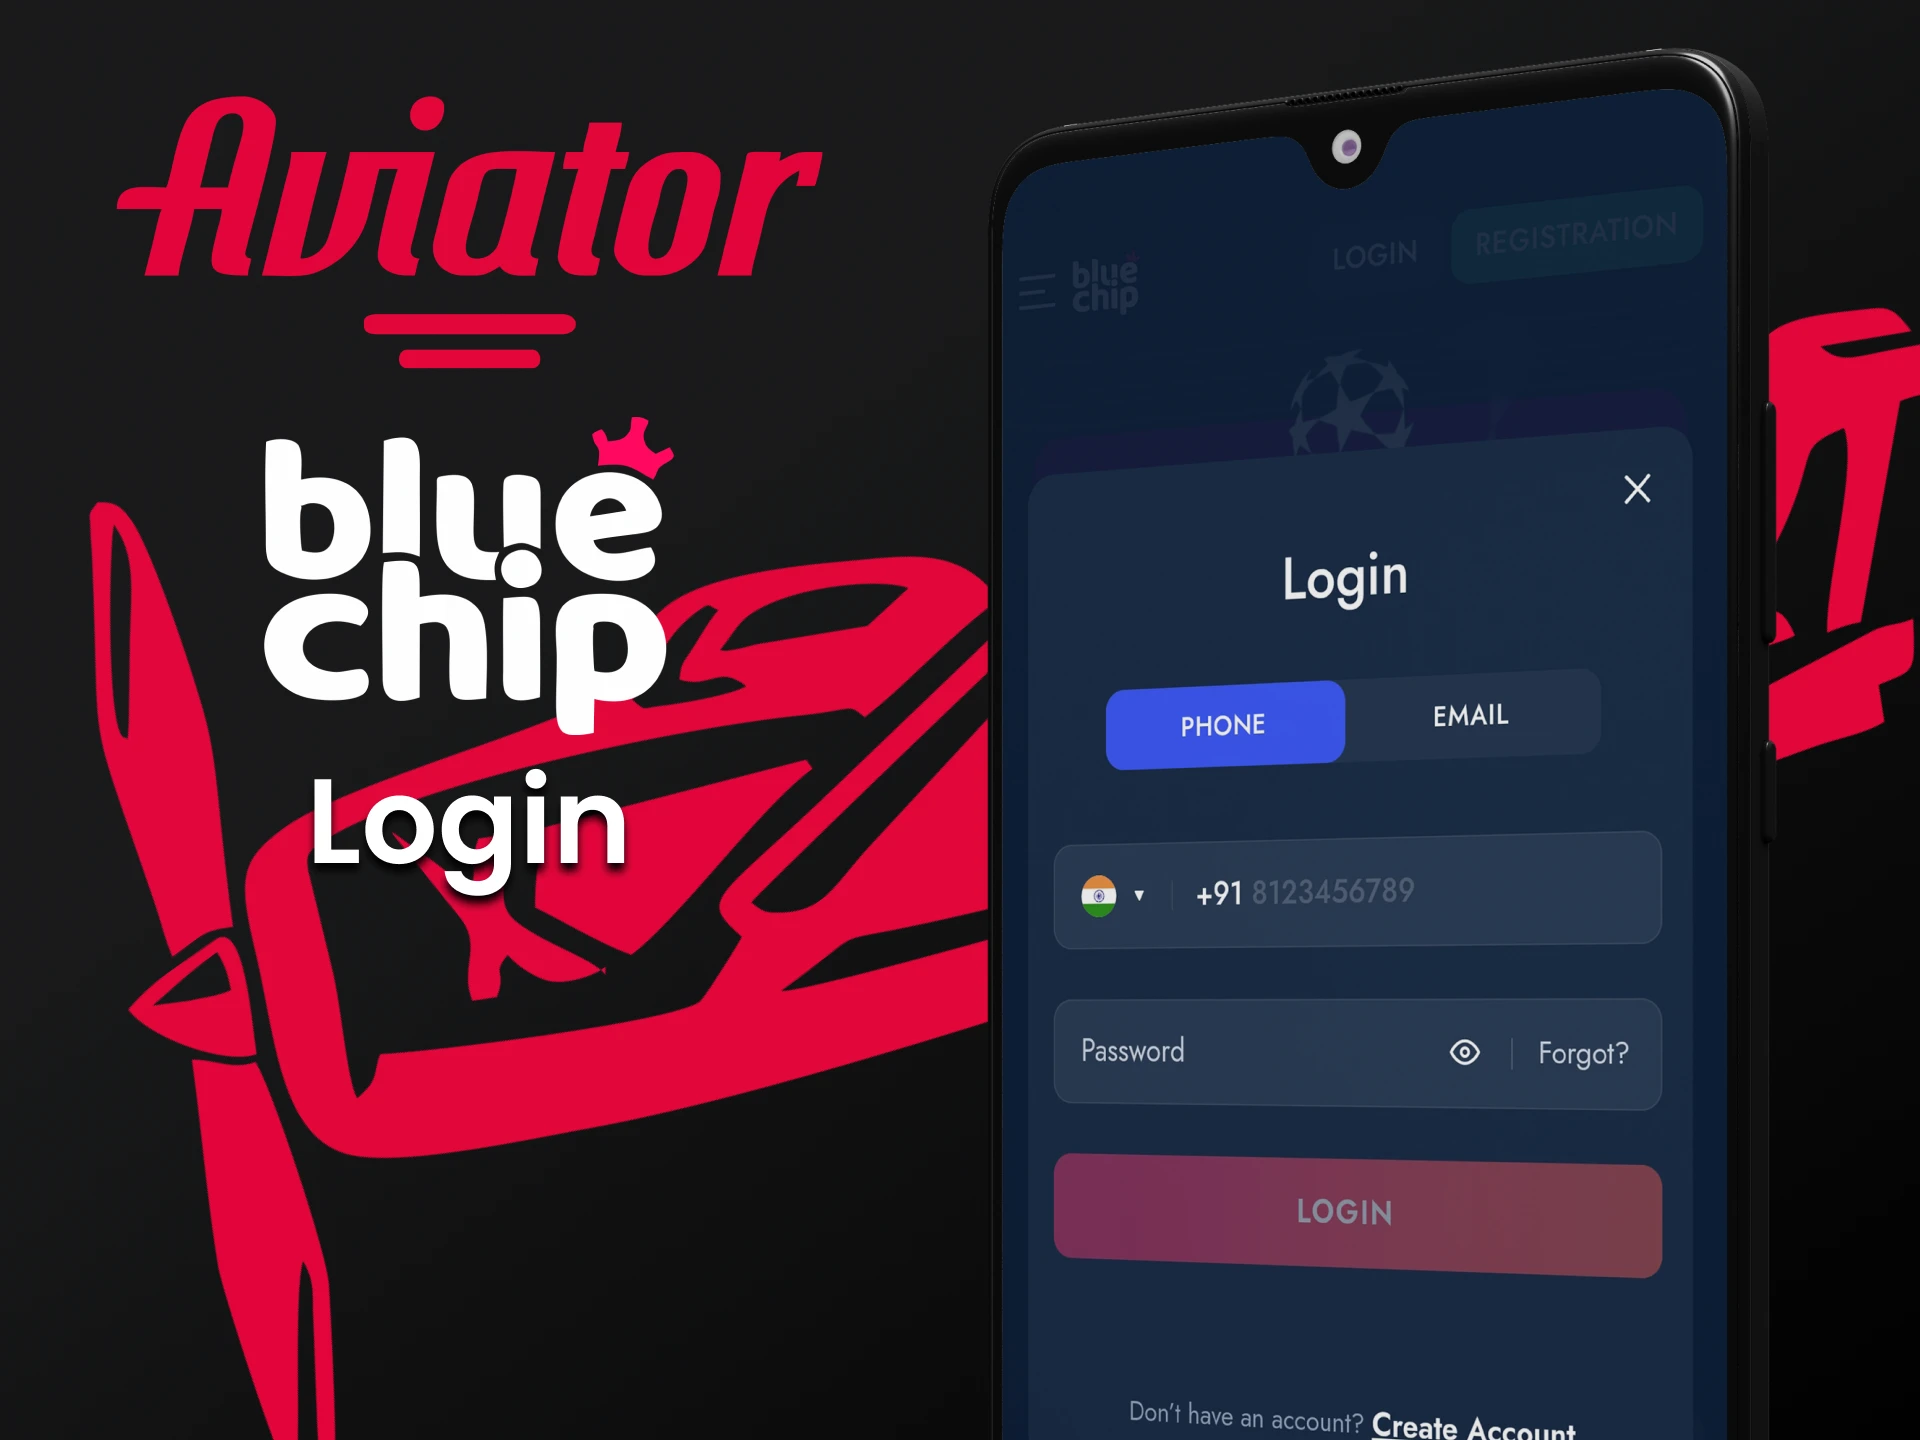 To start playing Aviator on Bluechip, log in to your account.